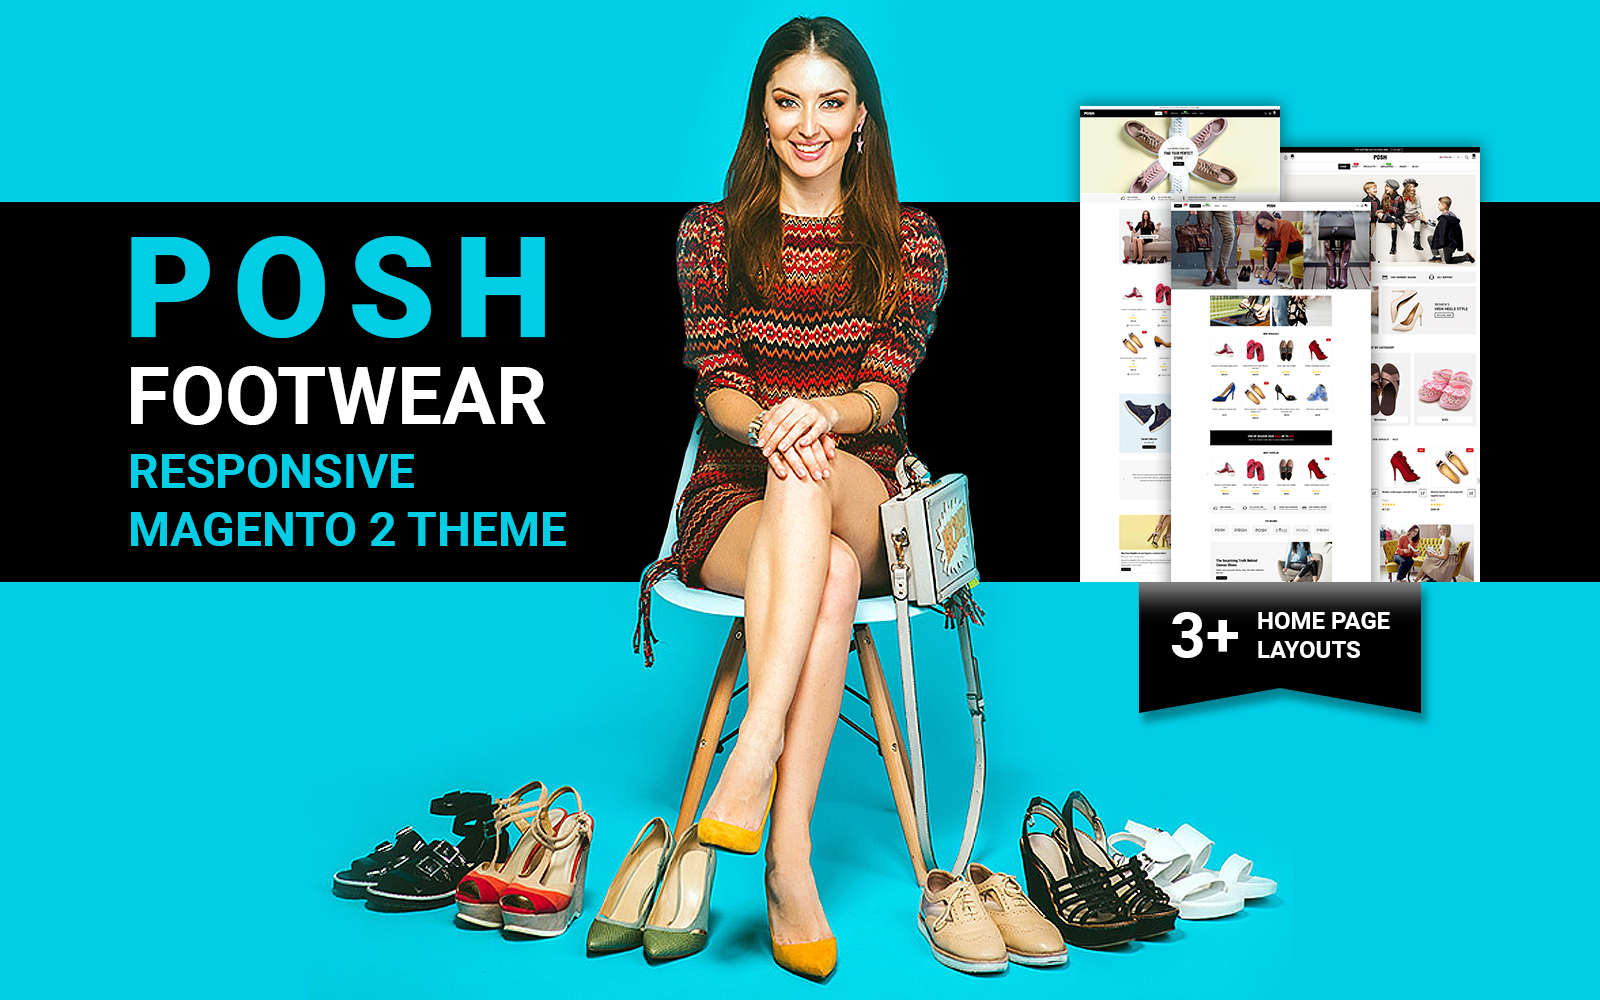 FootWear Responsive Theme For Magento 2